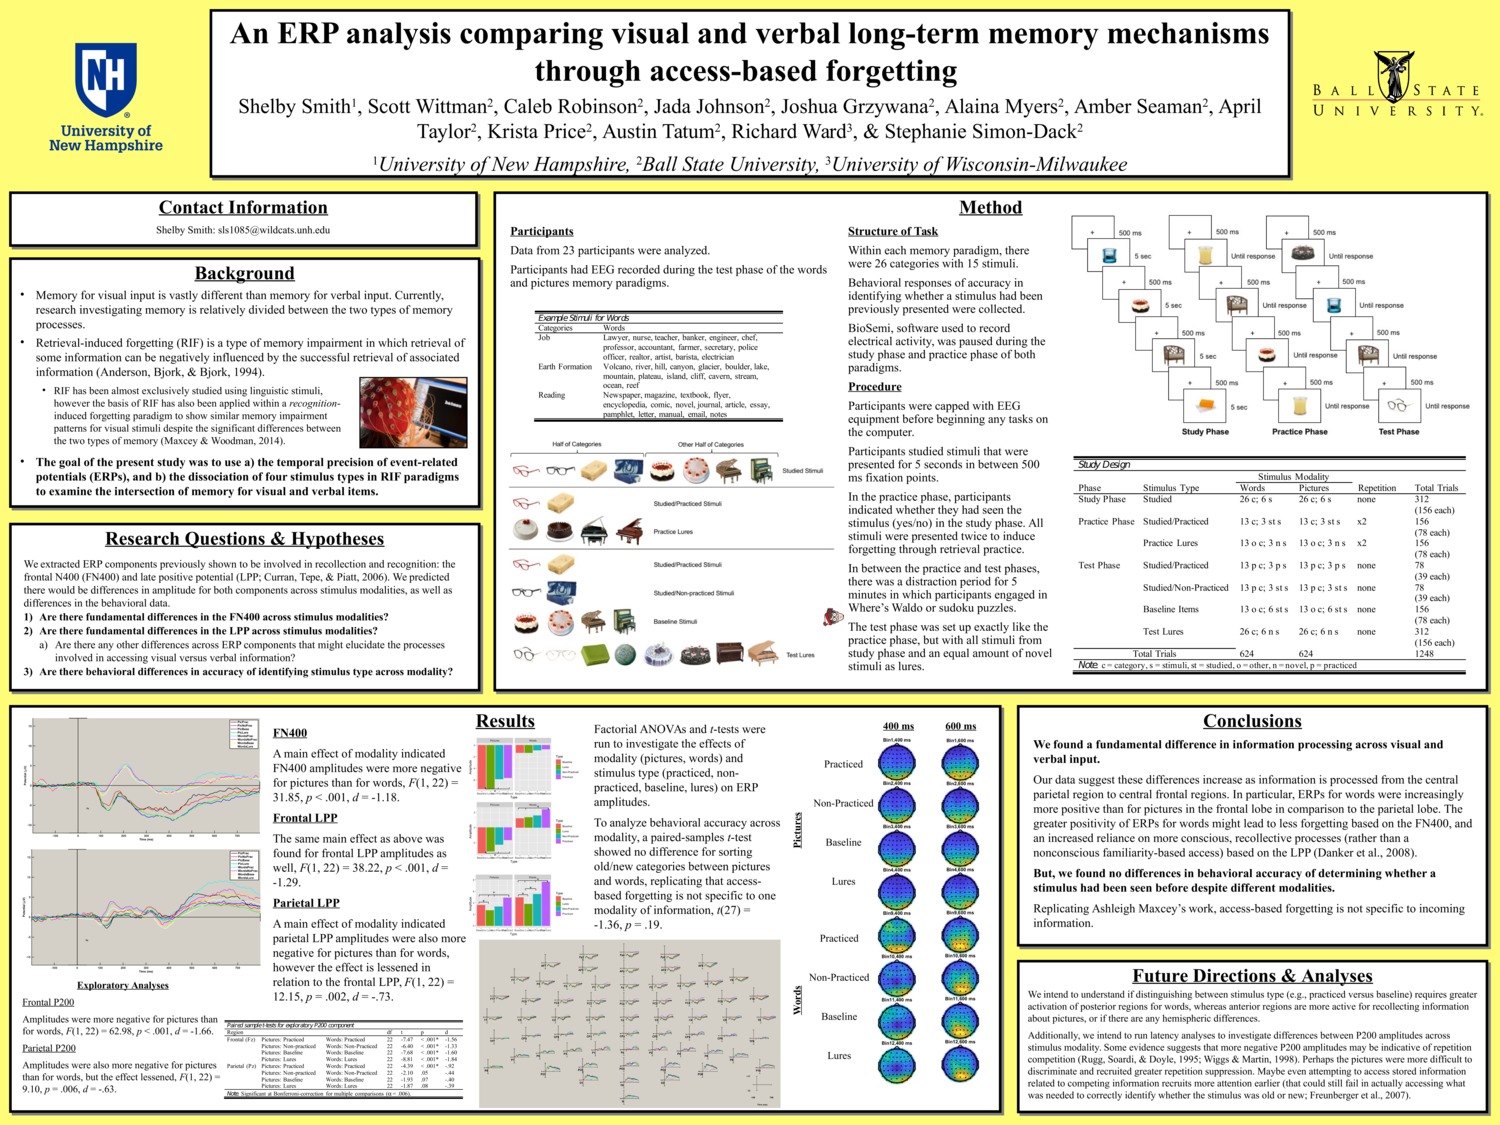 An Erp Analysis Comparing Visual And Verbal Long-Term Memory Mechanisms Through Access-Based Forgetting by sls1085